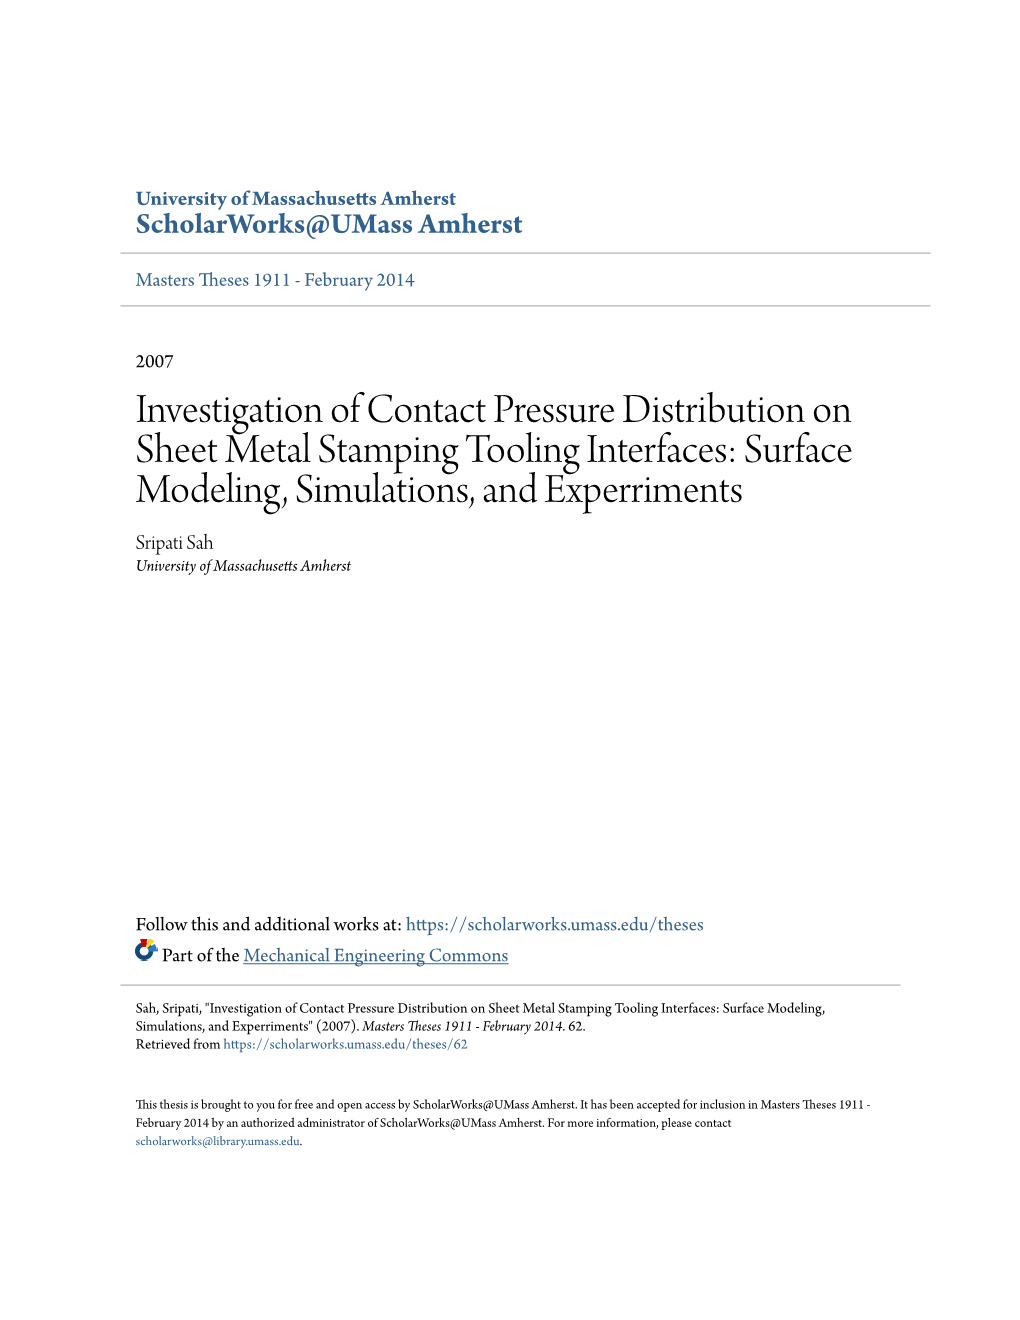 Investigation of Contact Pressure Distribution on Sheet Metal